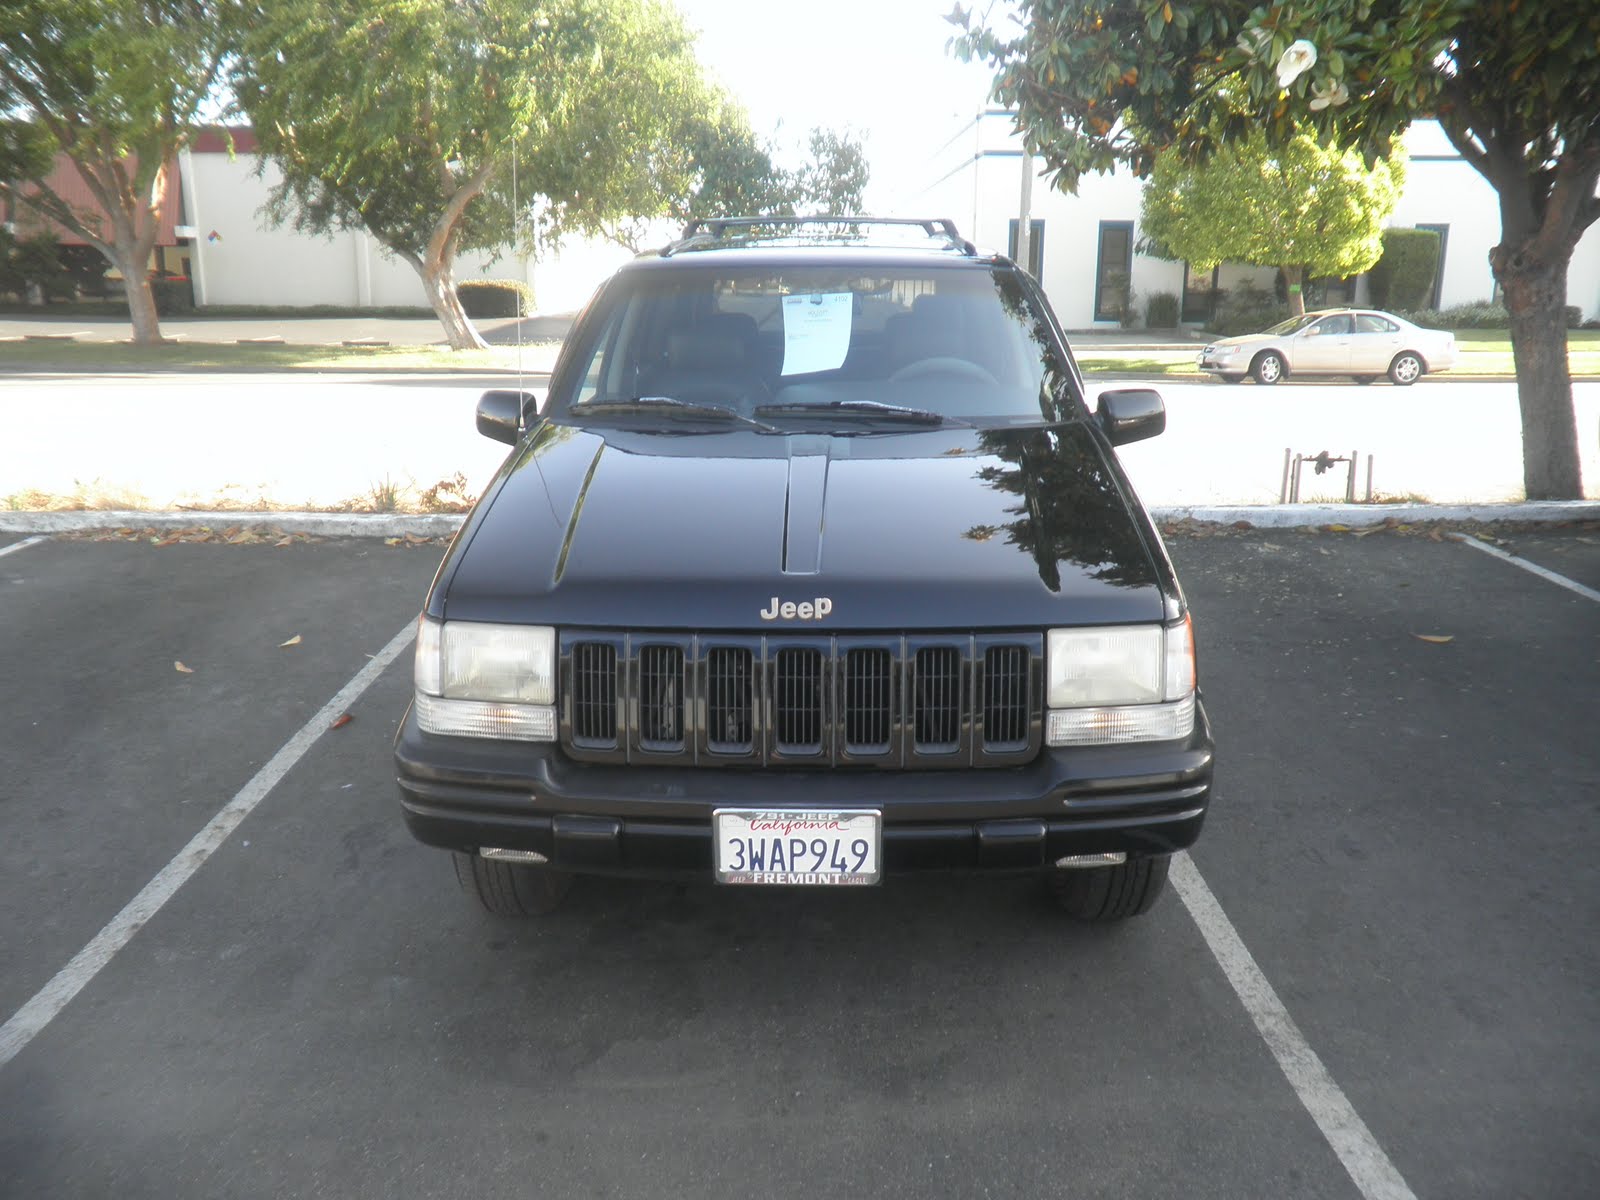 1997 Jeep grand cherokee limited electrical problems